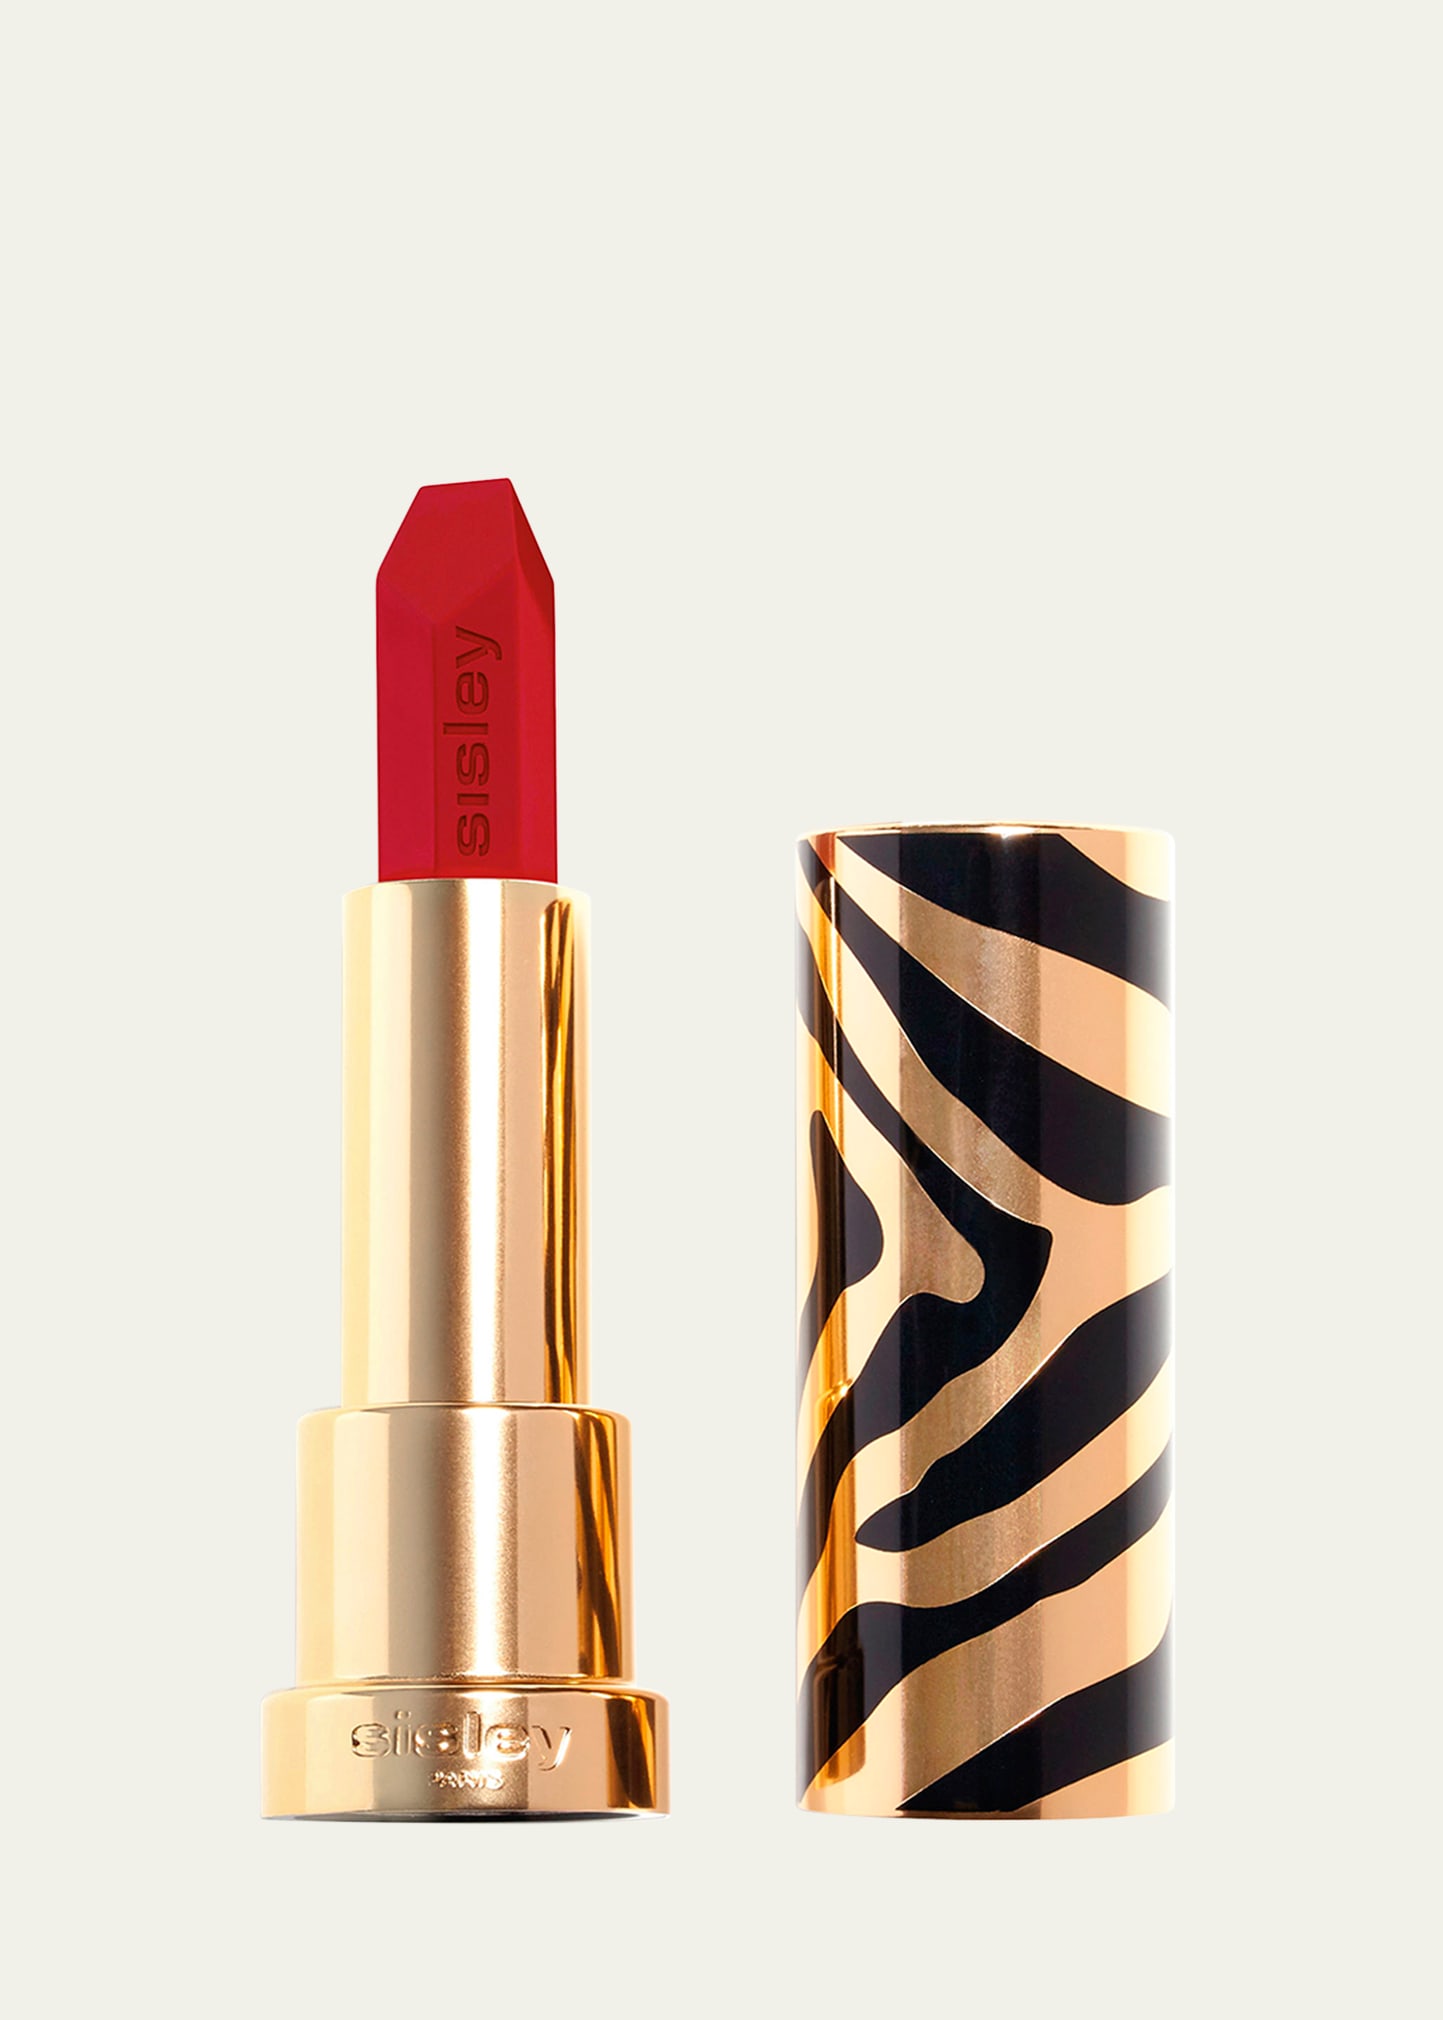 Sisley Paris Le Phyto-rouge Lipstick In 44 Rouge Hollywoo